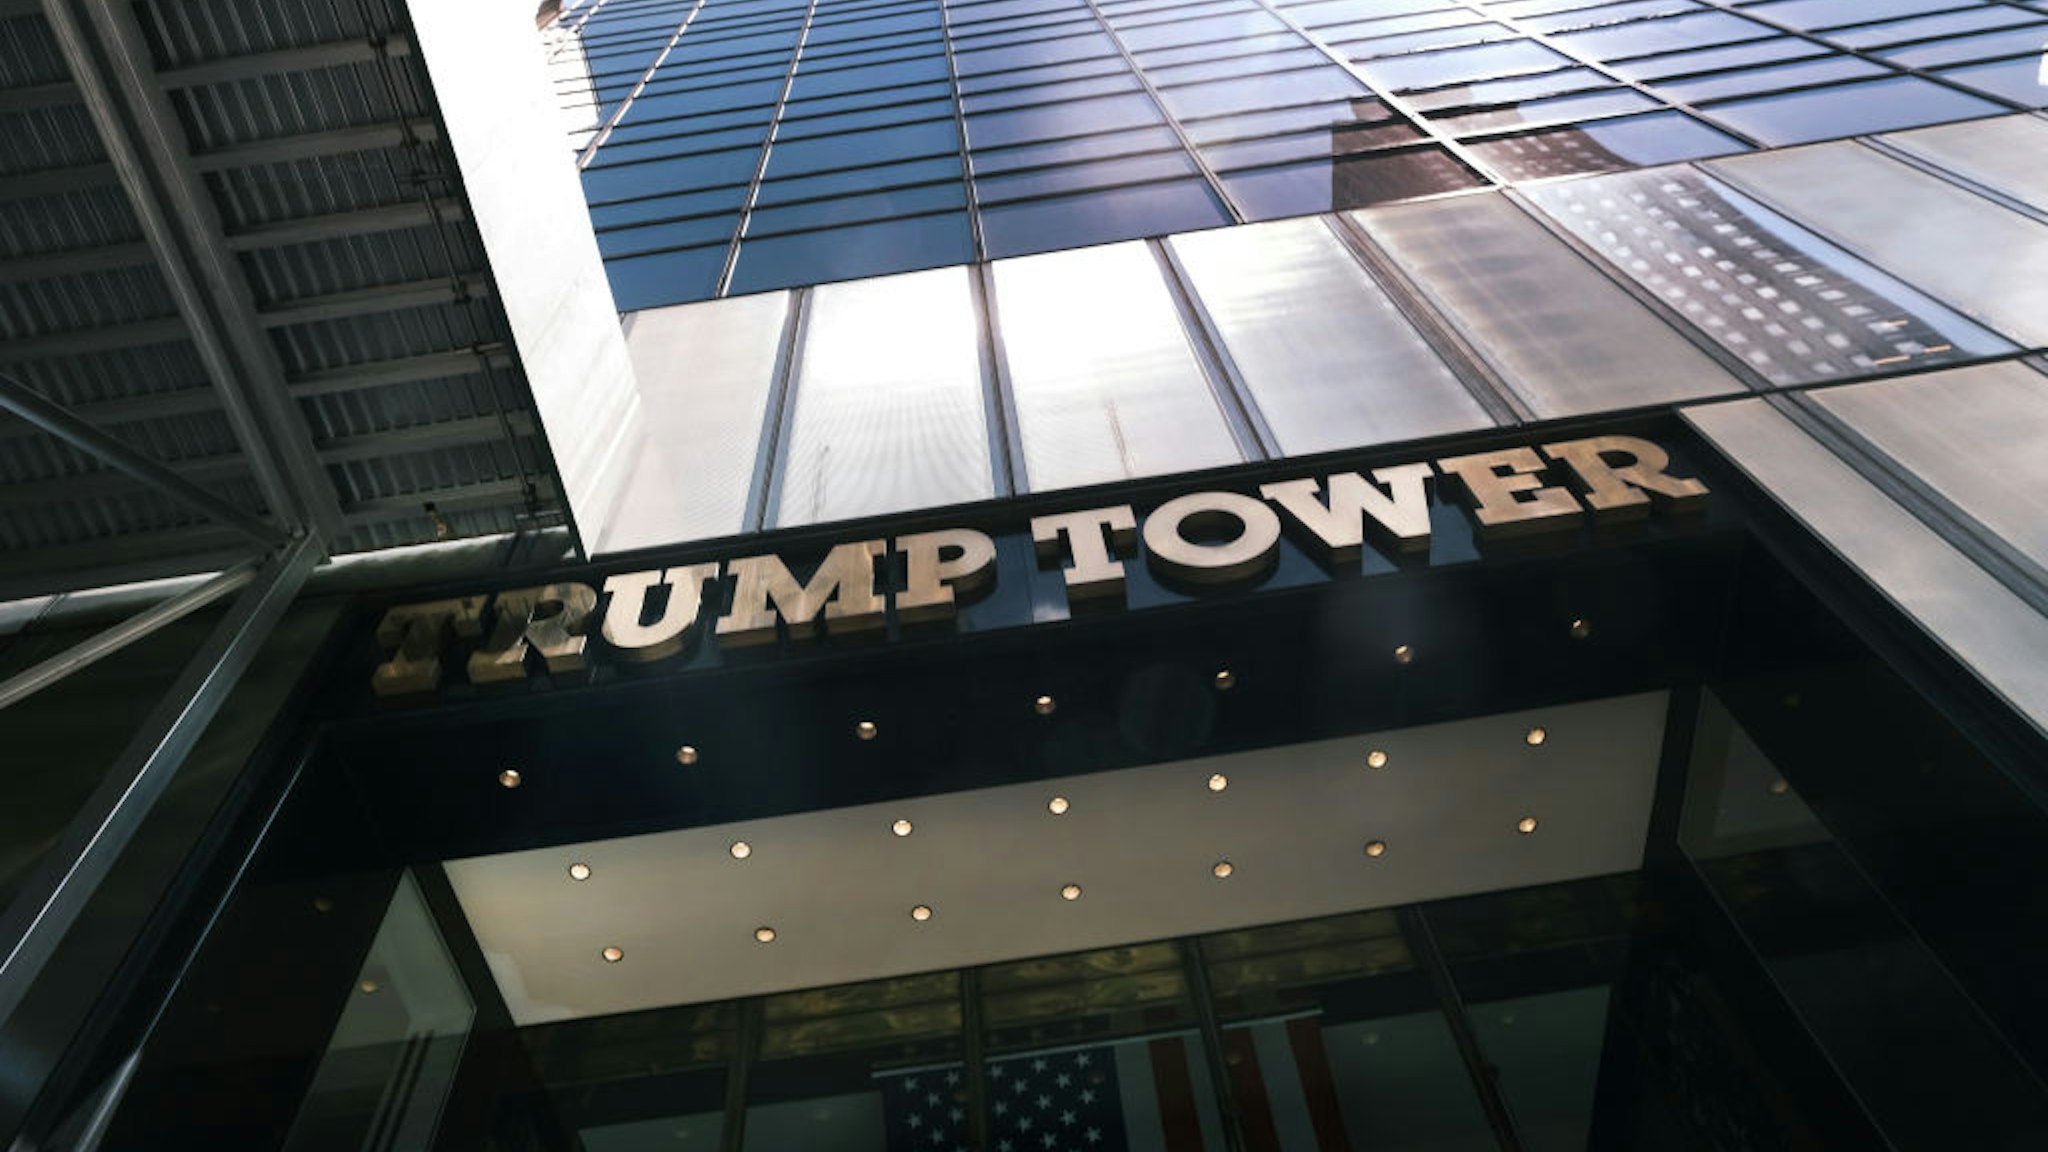 NEW YORK, NEW YORK - JUNE 30: Trump Tower, home to the Trump Organization, stands along Fifth Avenue on June 30, 2021 in New York City. According to reports, federal prosecutors with the Manhattan district attorney's office are expected to charge the Trump Organization, and its CFO Allen Weisselberg, with tax-related crimes as soon as Thursday. (Photo by Spencer Platt/Getty Images)